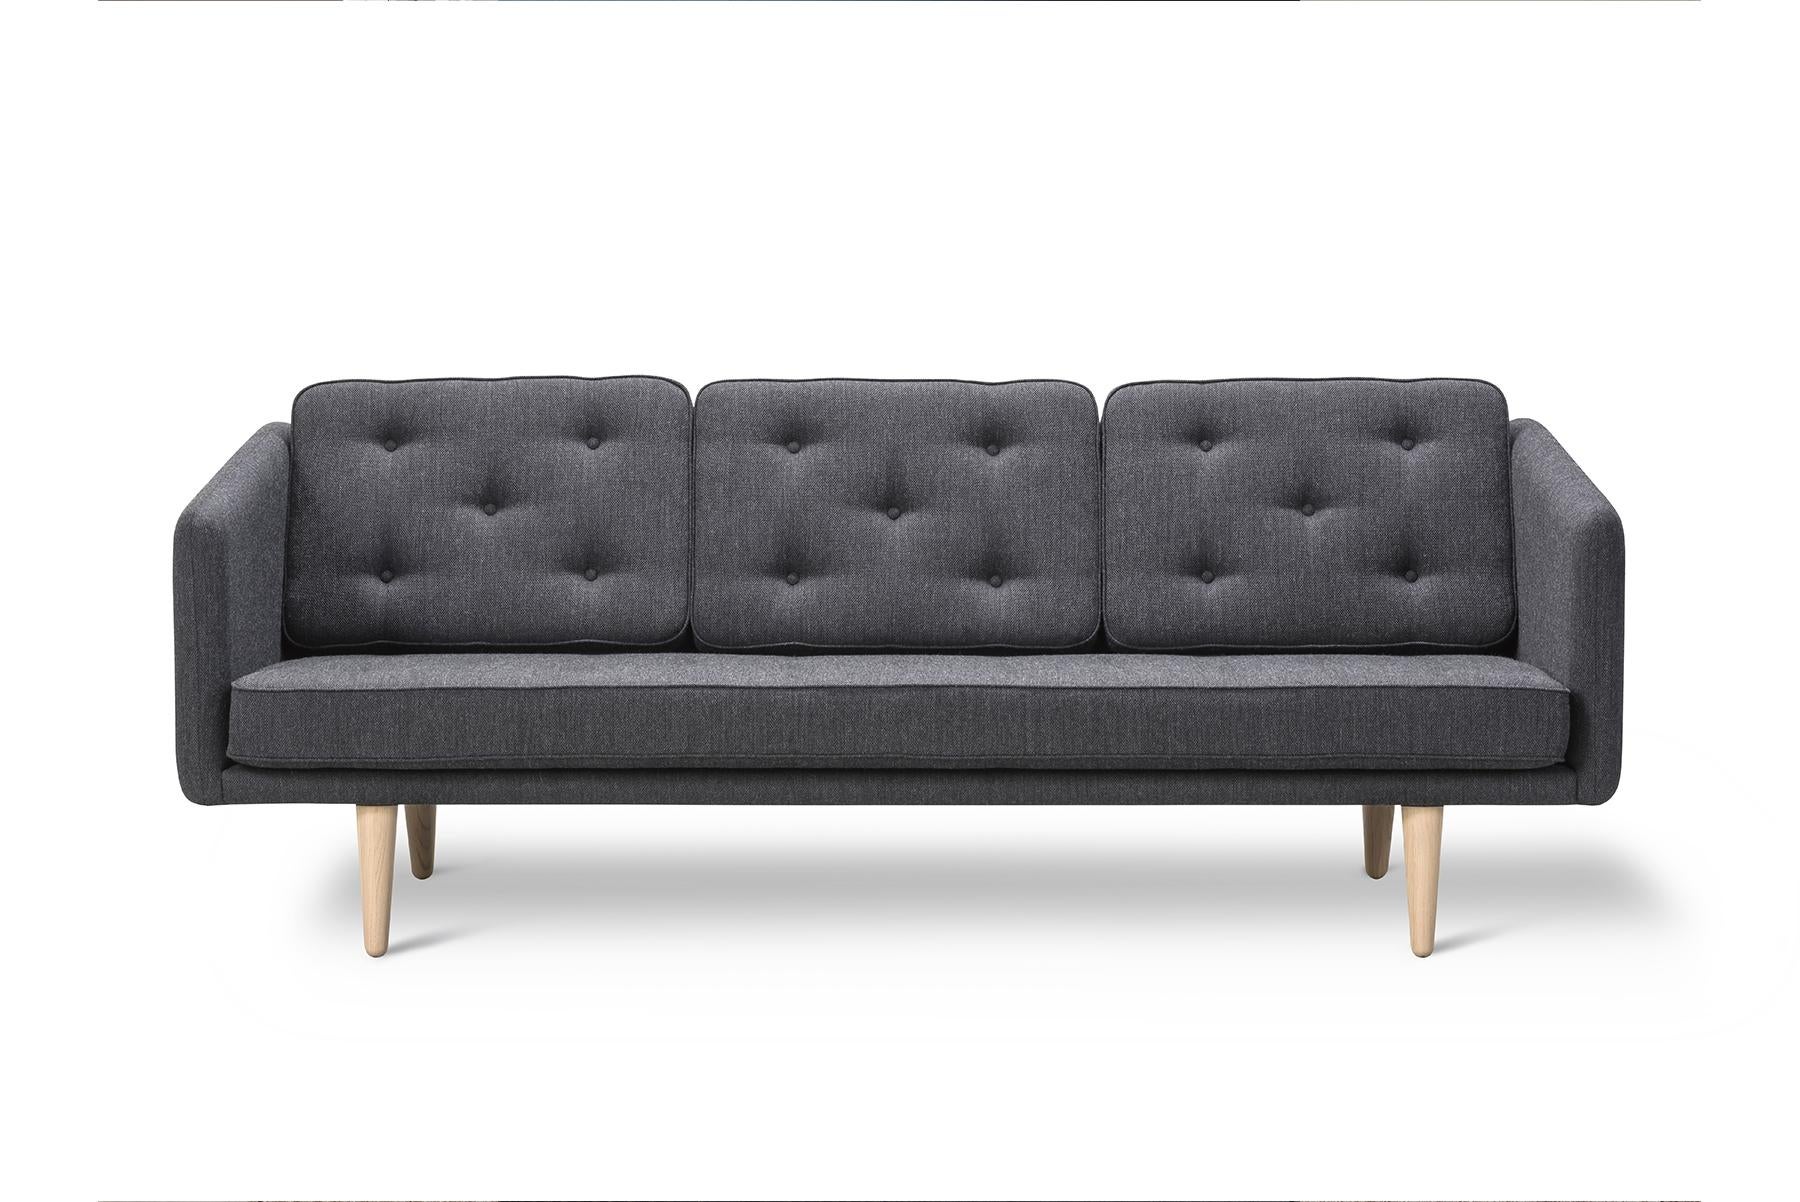 Mogensen designed the Børge Mogensen 3-seater sofa of the No.1 series in 1955. He united a sharply defined shape with a softer, more intimate character that works well as the focal point of the room.